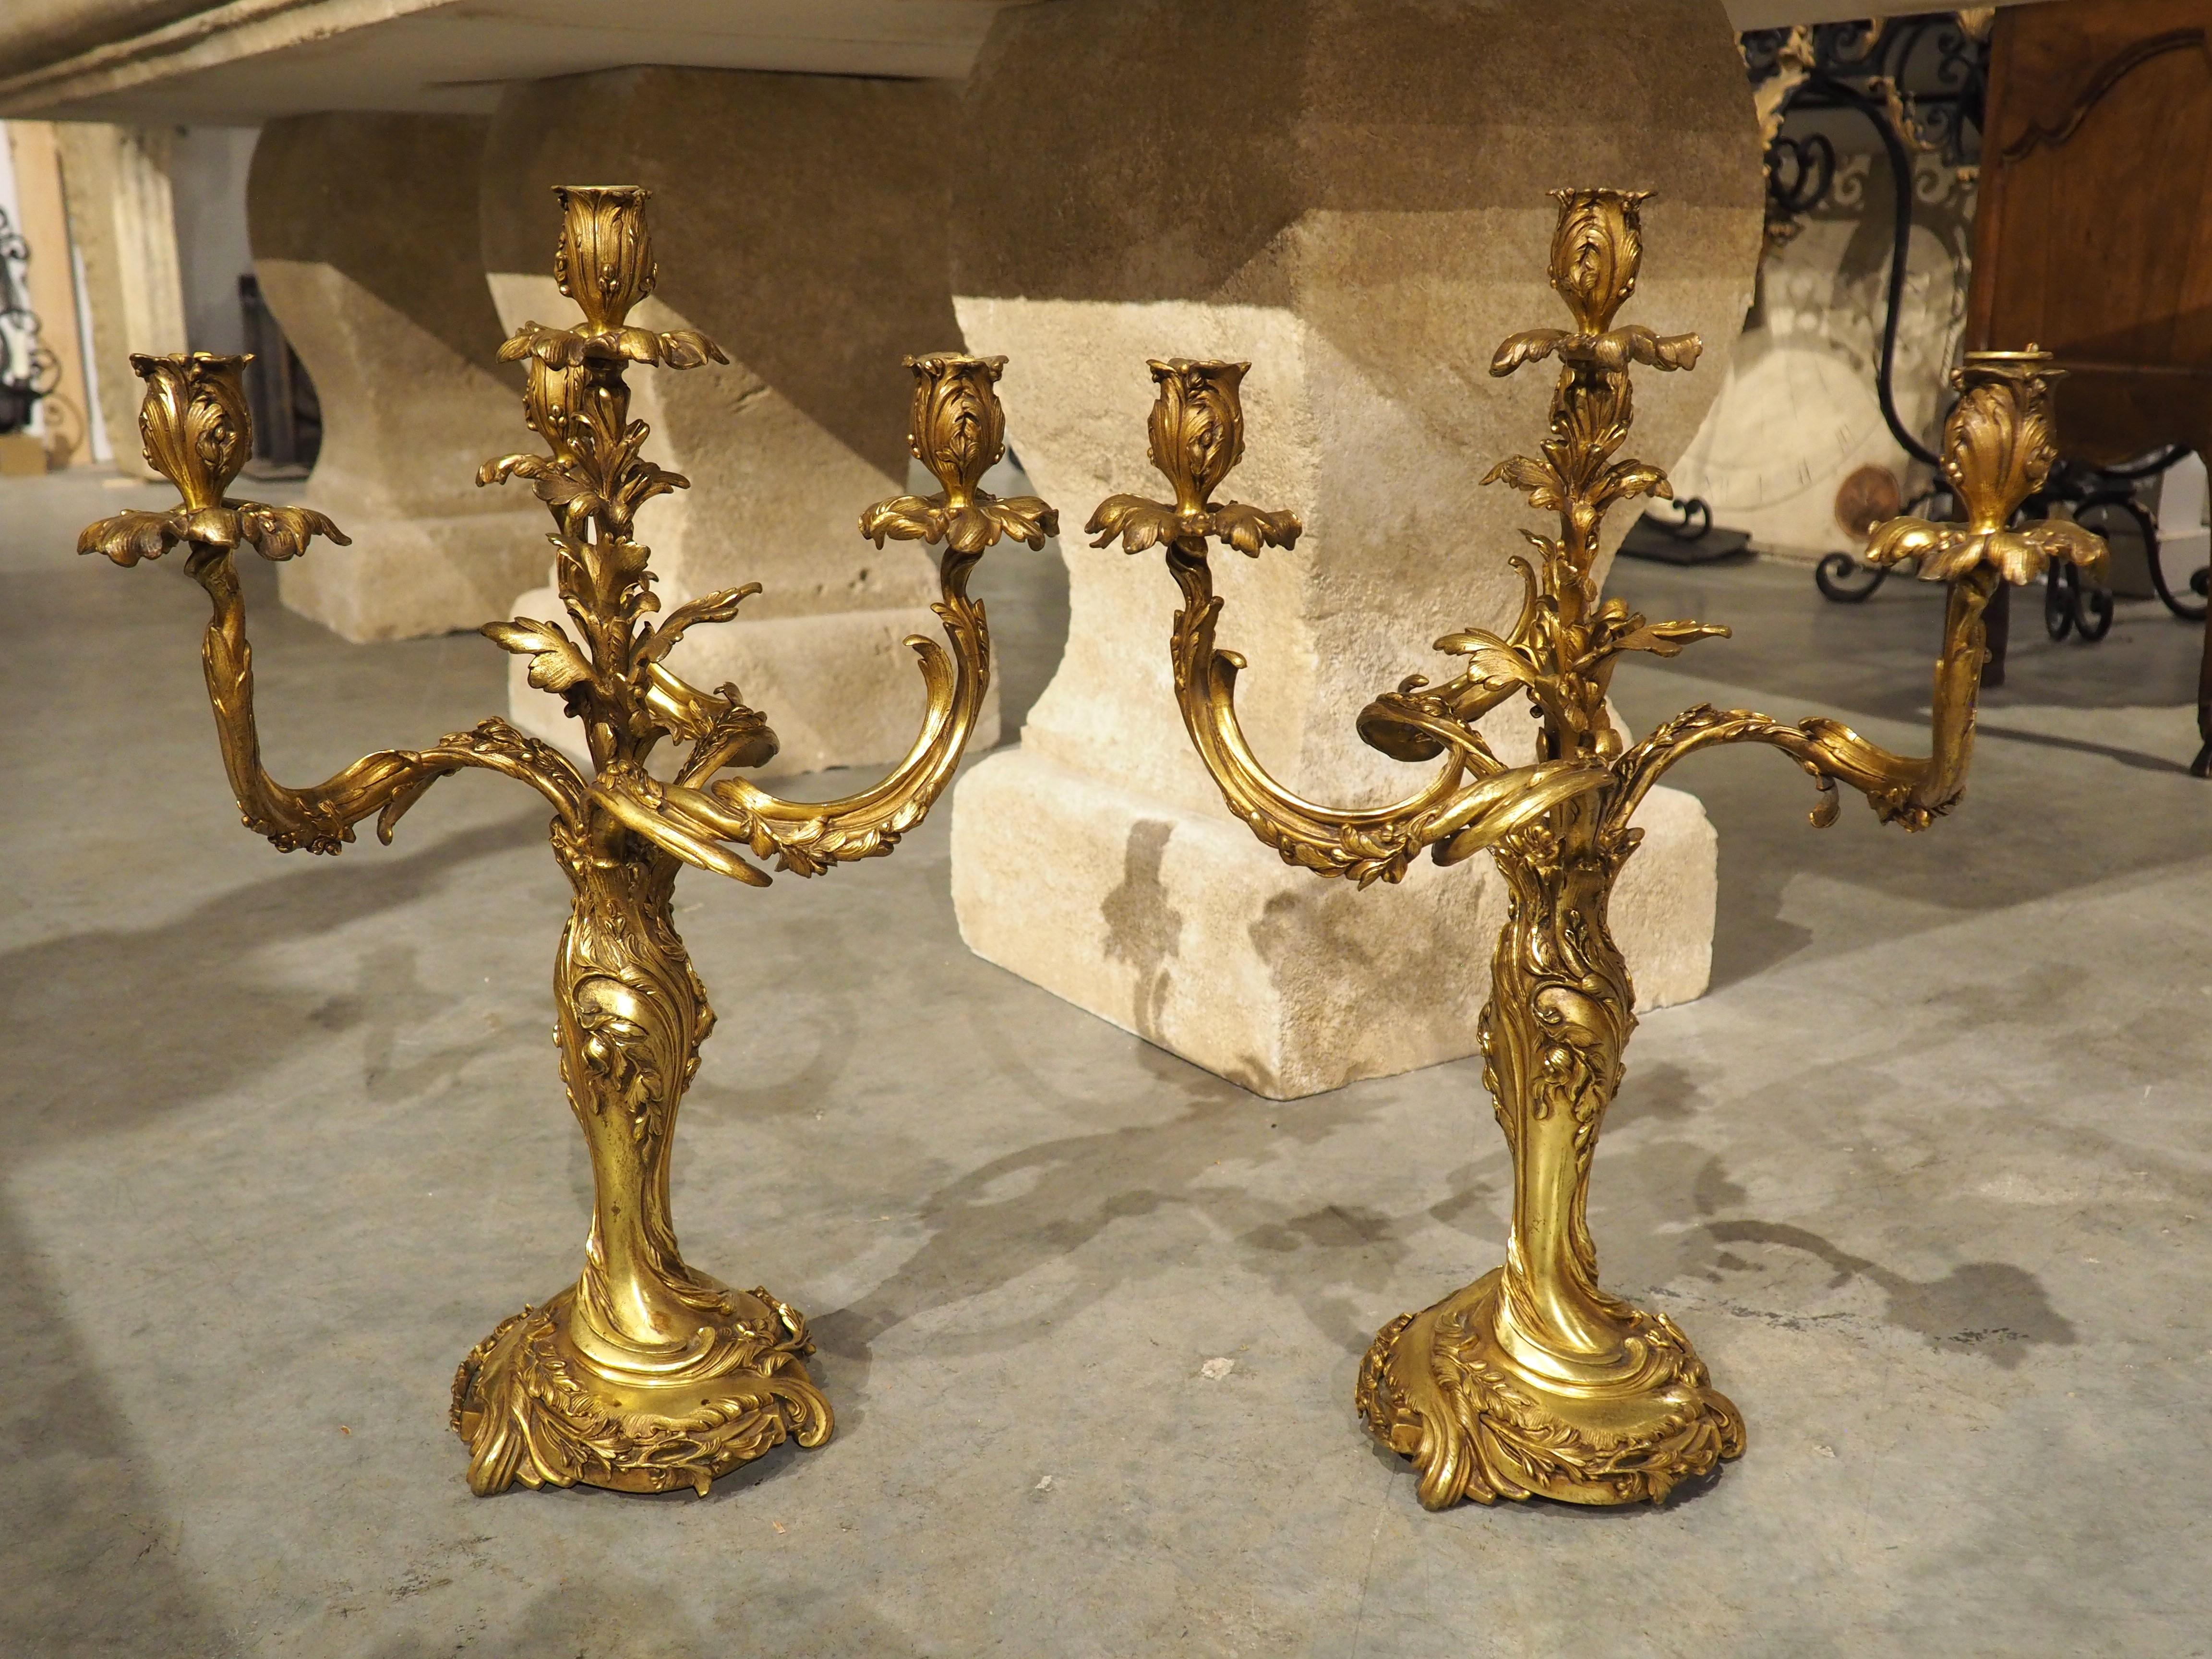 Full of life and movement, this pair of gilt bronze candelabras from Belgium (signed by Georges Van de Voorde) features four parted leaf bobeches topped by leaf cup capitals. The tallest sconce is positioned in the center of the other three, rising